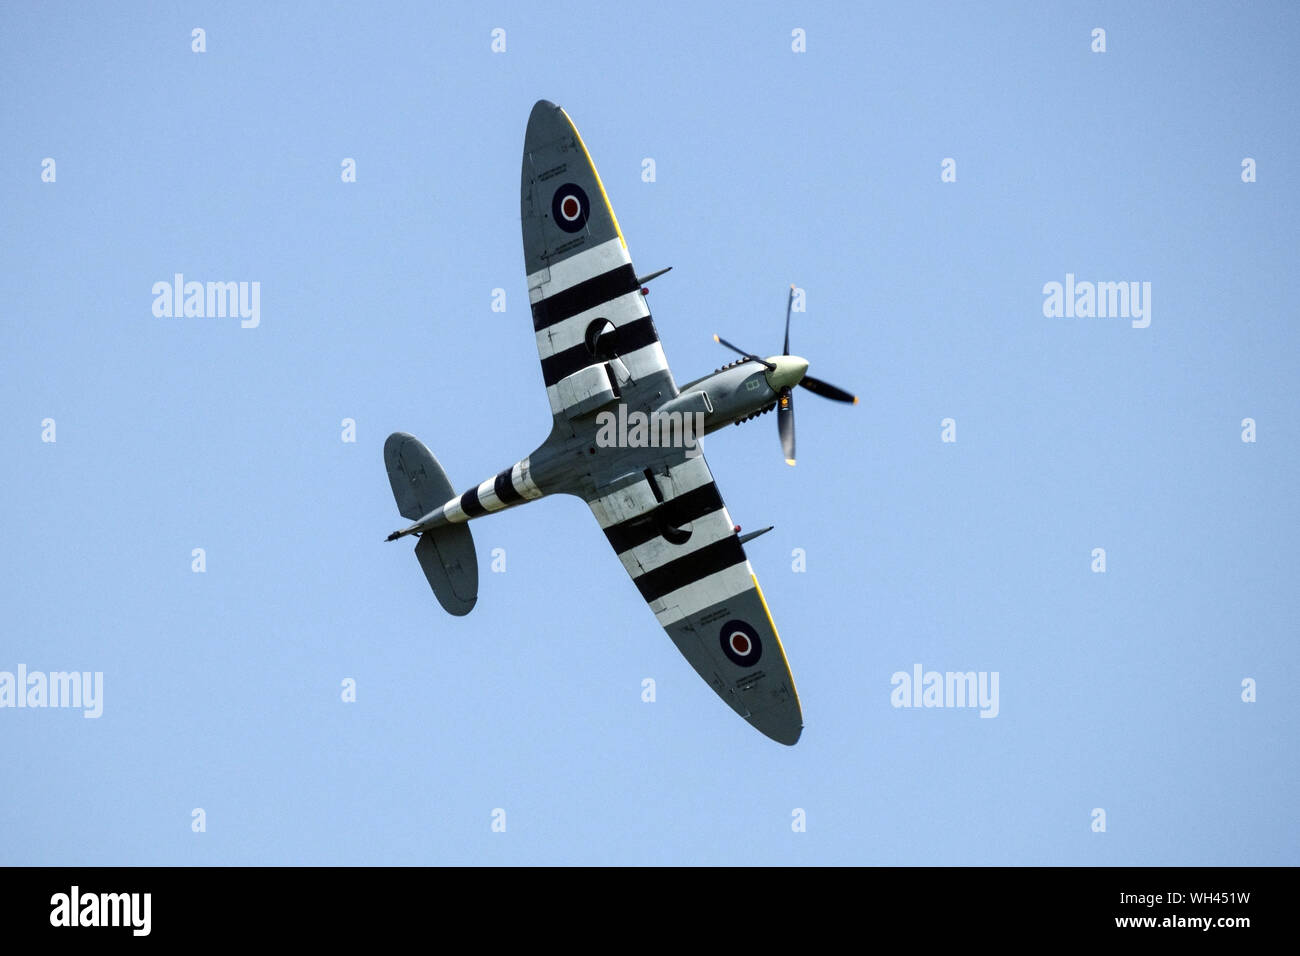 Supermarine Spitfire XV fighter flying, airplane on blue sky, view from below on striped wings Stock Photo